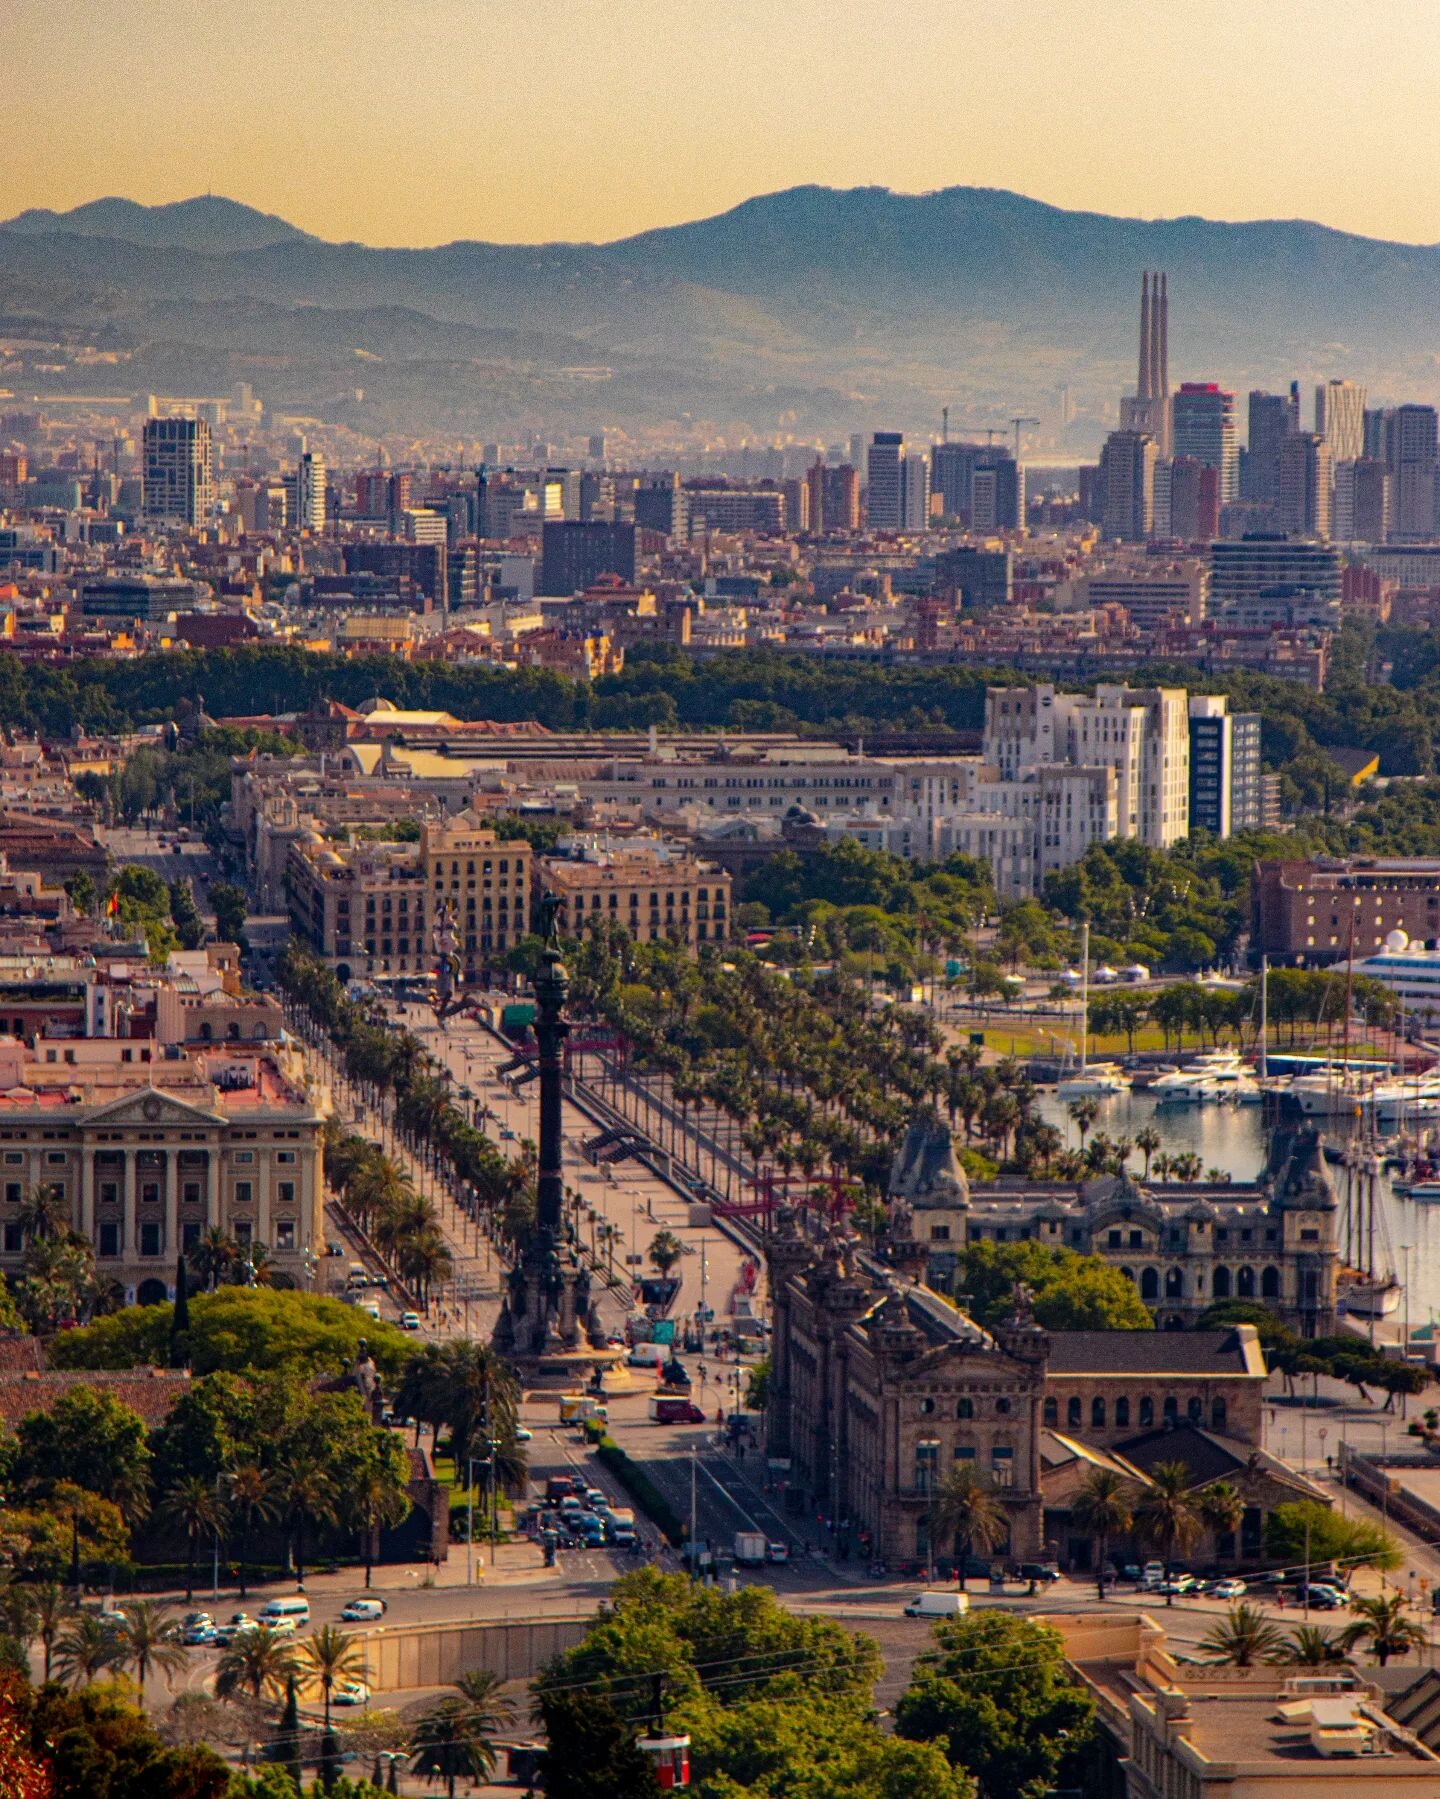 Barcelona from Above.
.
.
.
#barcelona #spain🇪🇸 #canon #weekly_feature #weroamspain #summer #ourplanetdaily #theimaged #streetphotography #photography #photooftheday #canon80d #canonphotography #weekly_feature #warmweather #roamtheplanet